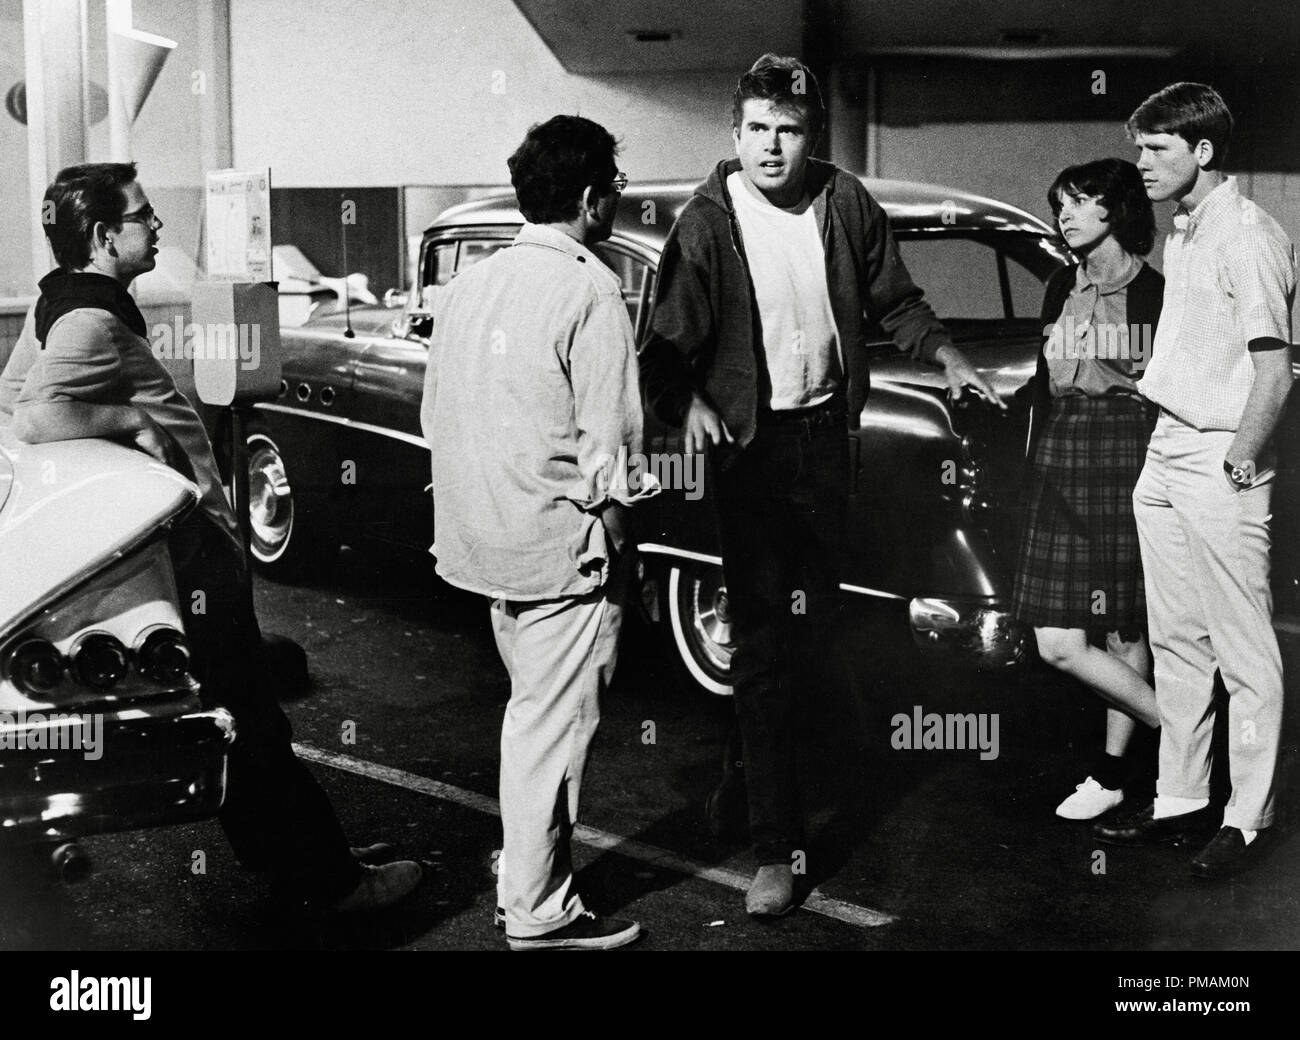 Charles Martin Smith, Richard Dreyfuss, Paul Le Mat, Cindy Williams, Ron Howard, "American Graffiti" (1973) Universal Pictures référence #  33300 Fichier 820THA Banque D'Images